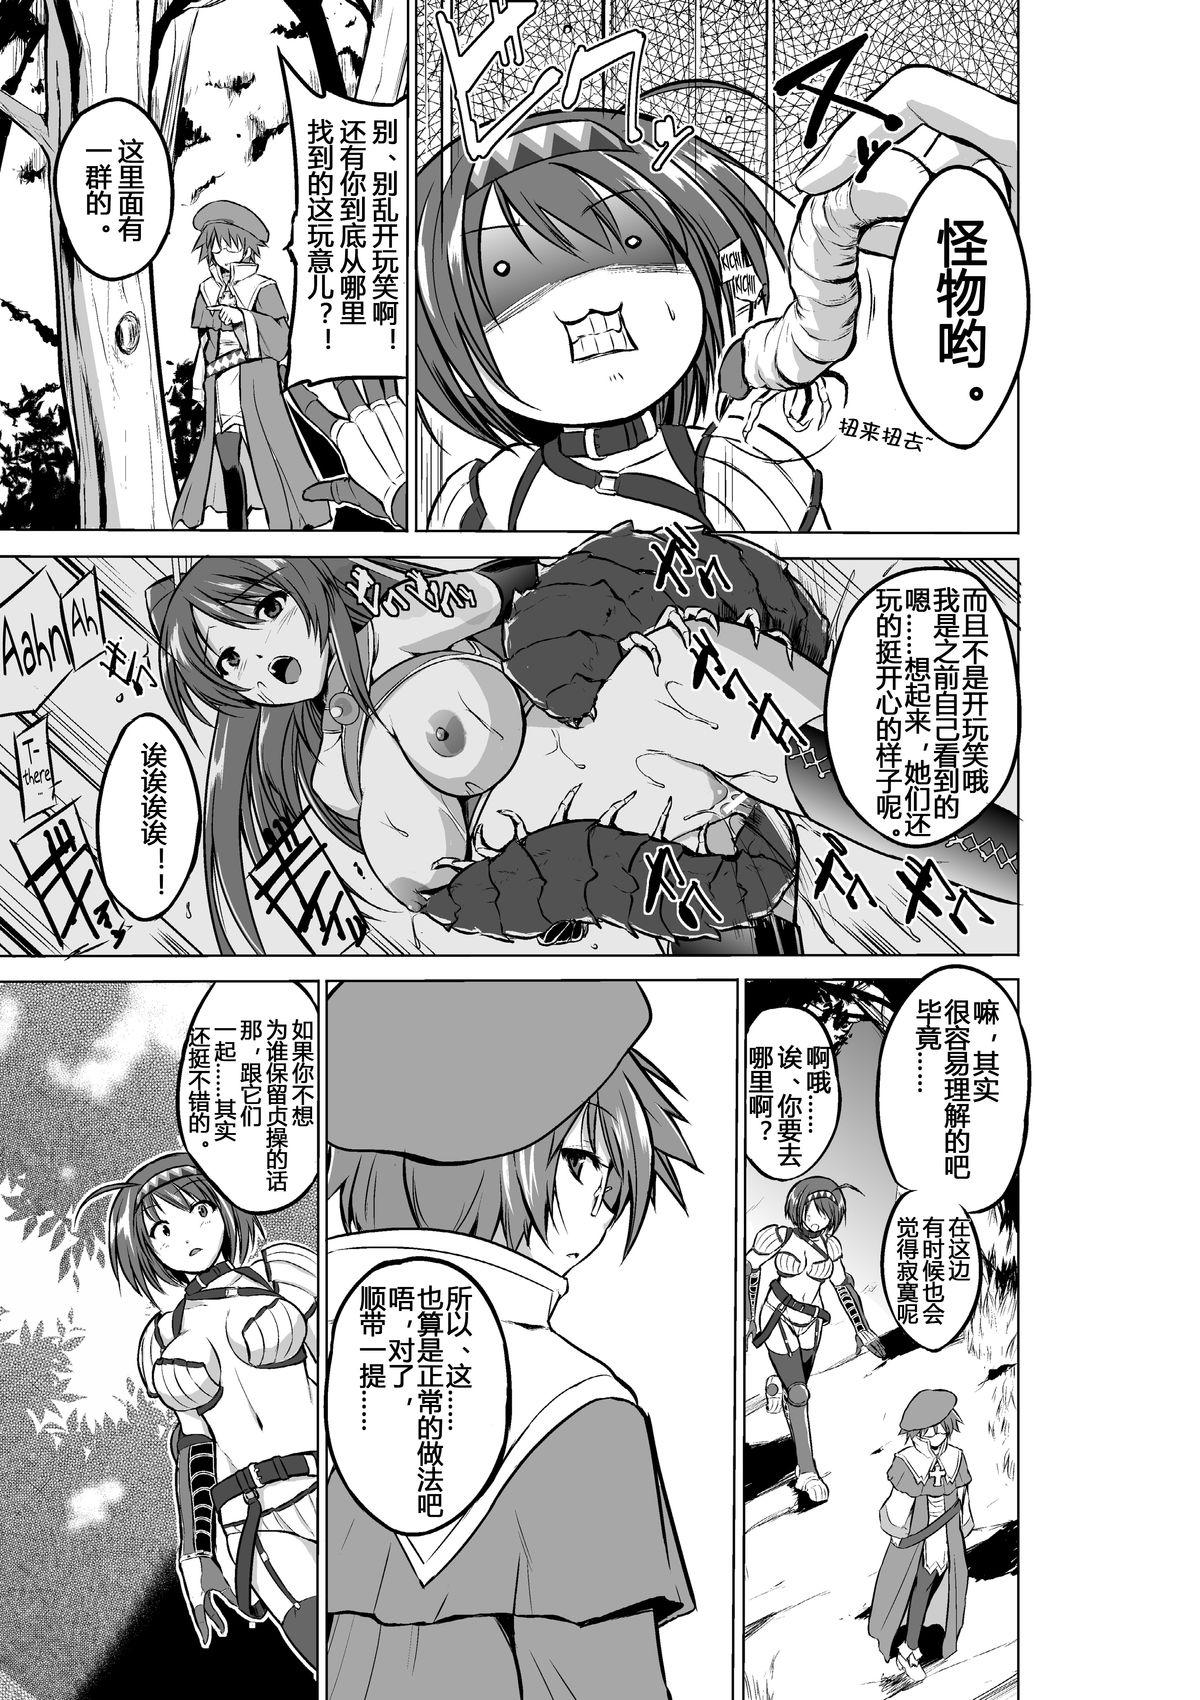 Crossdresser Dungeon Travelers - Chie no Himegoto - Toheart2 Homosexual - Page 5